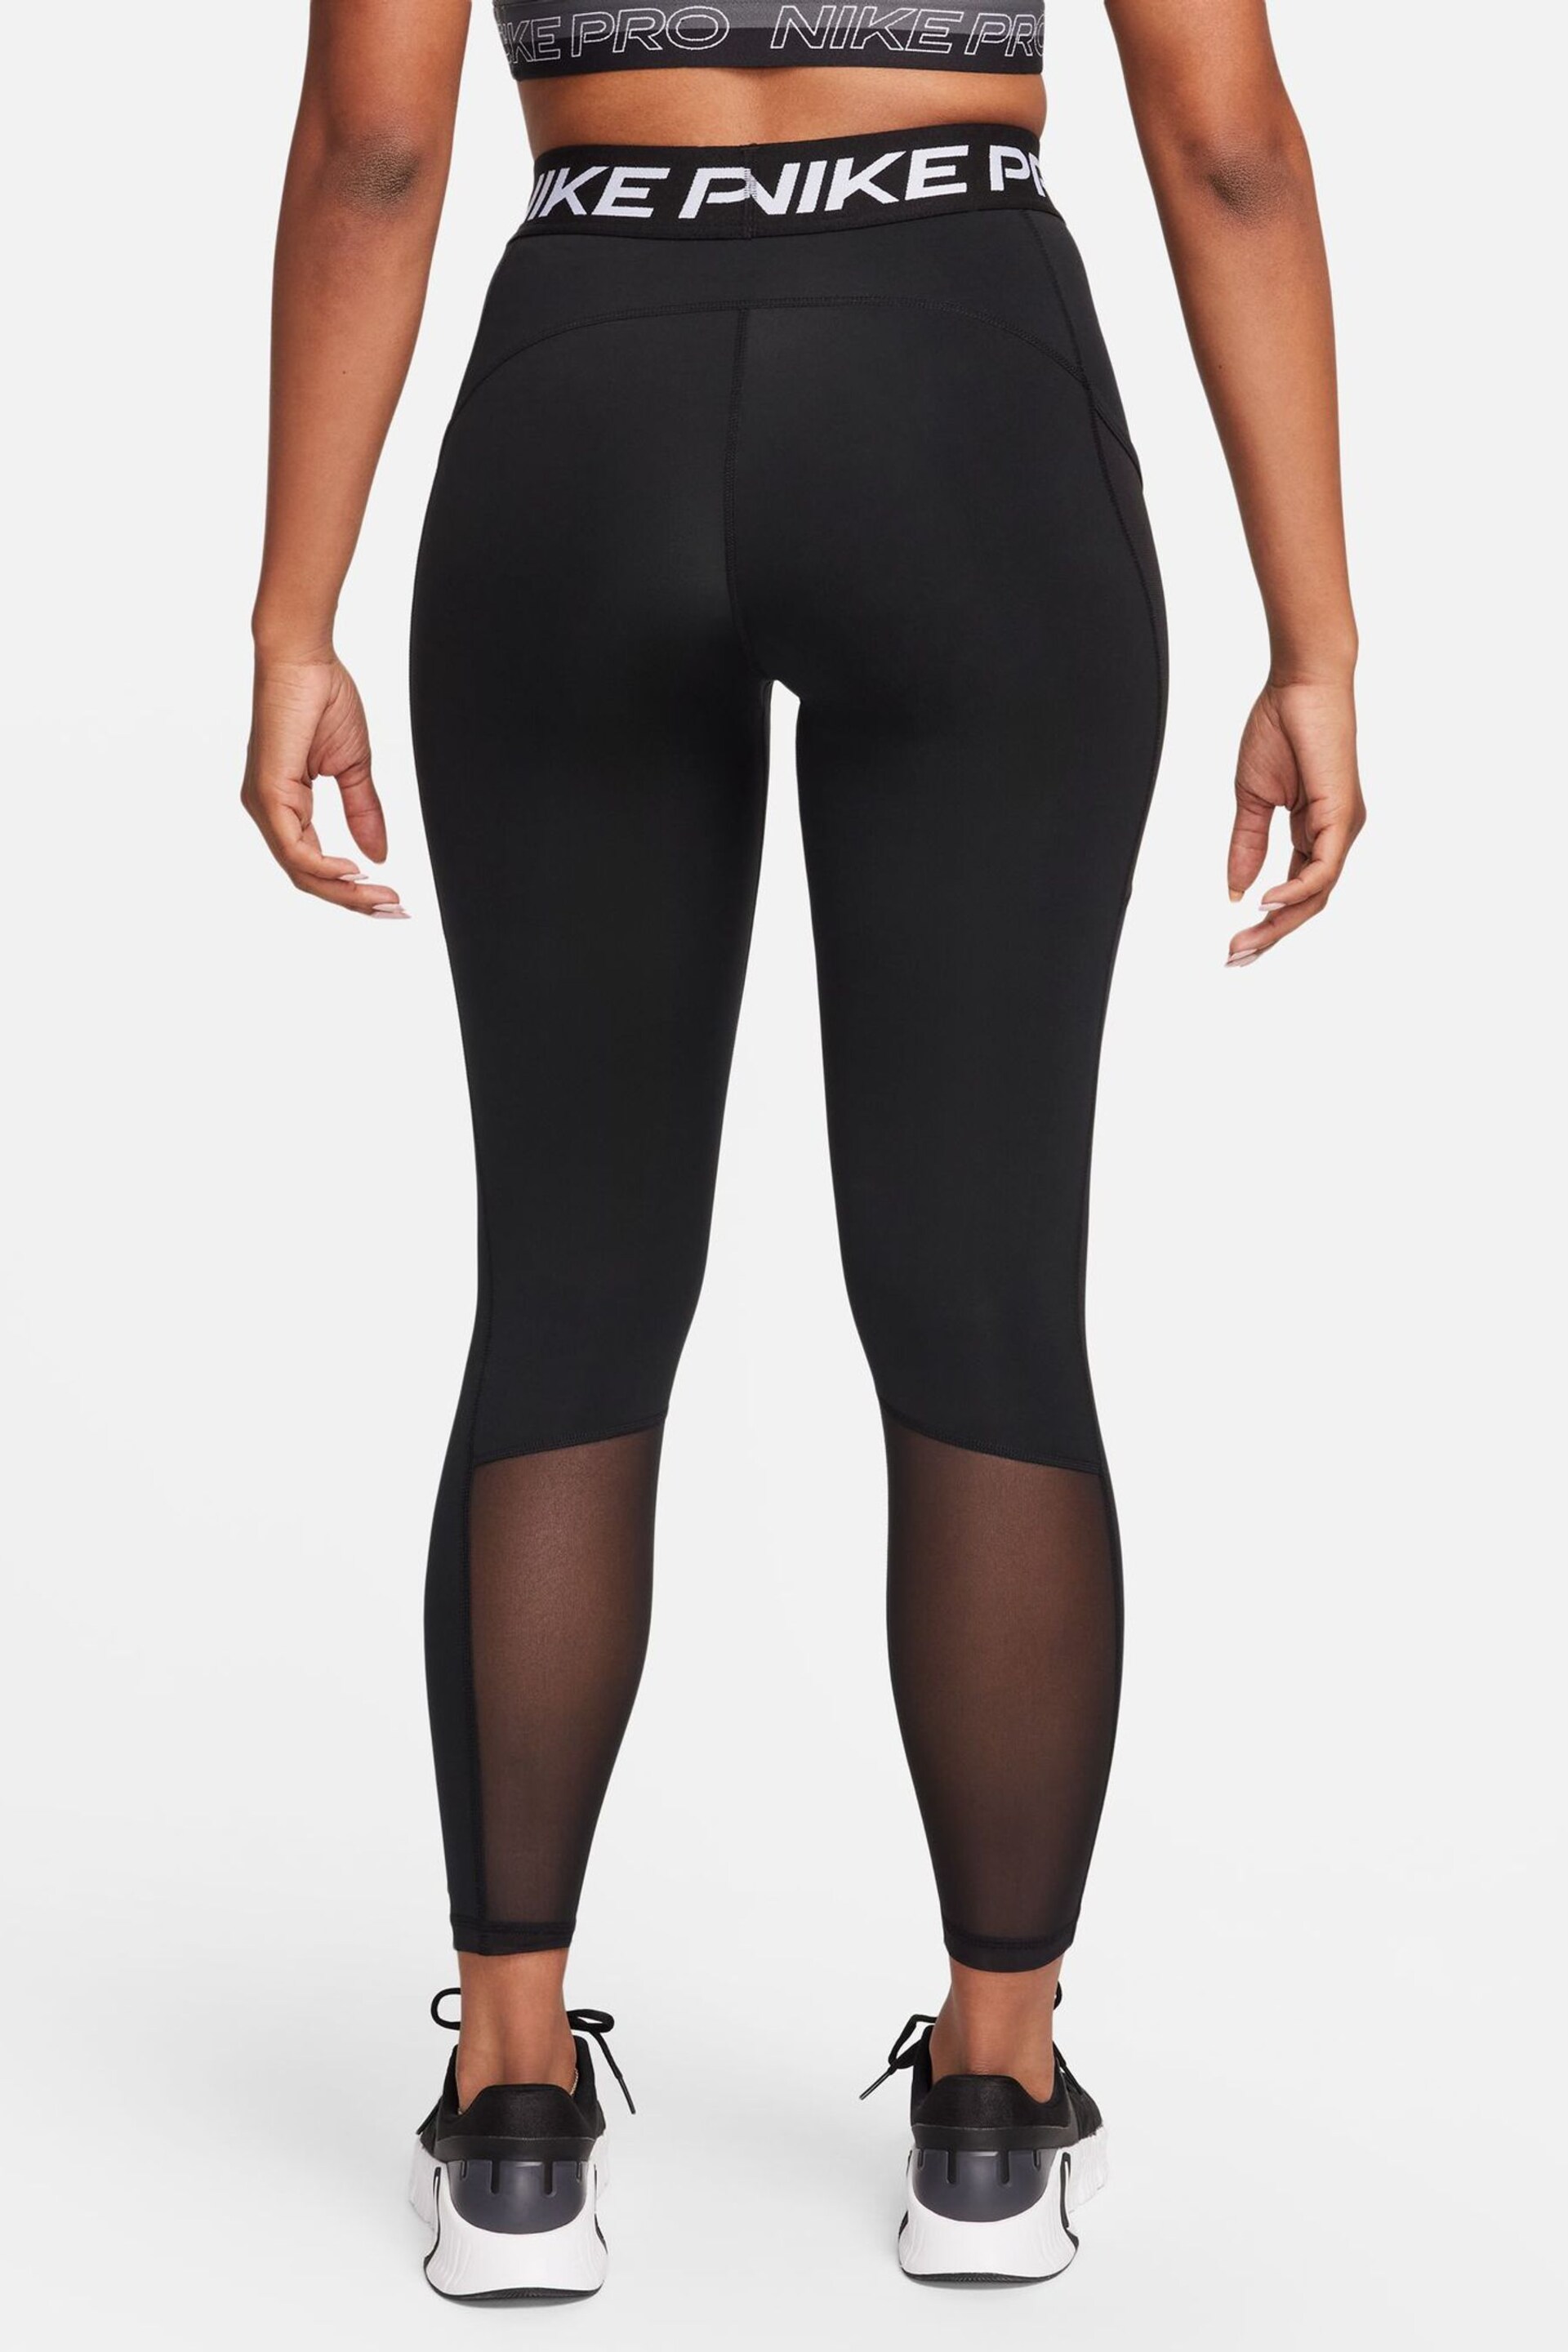 Nike Black Pro Dri-FIT 365 Mid-Rise 7/8 Leggings with Pockets - Image 2 of 7